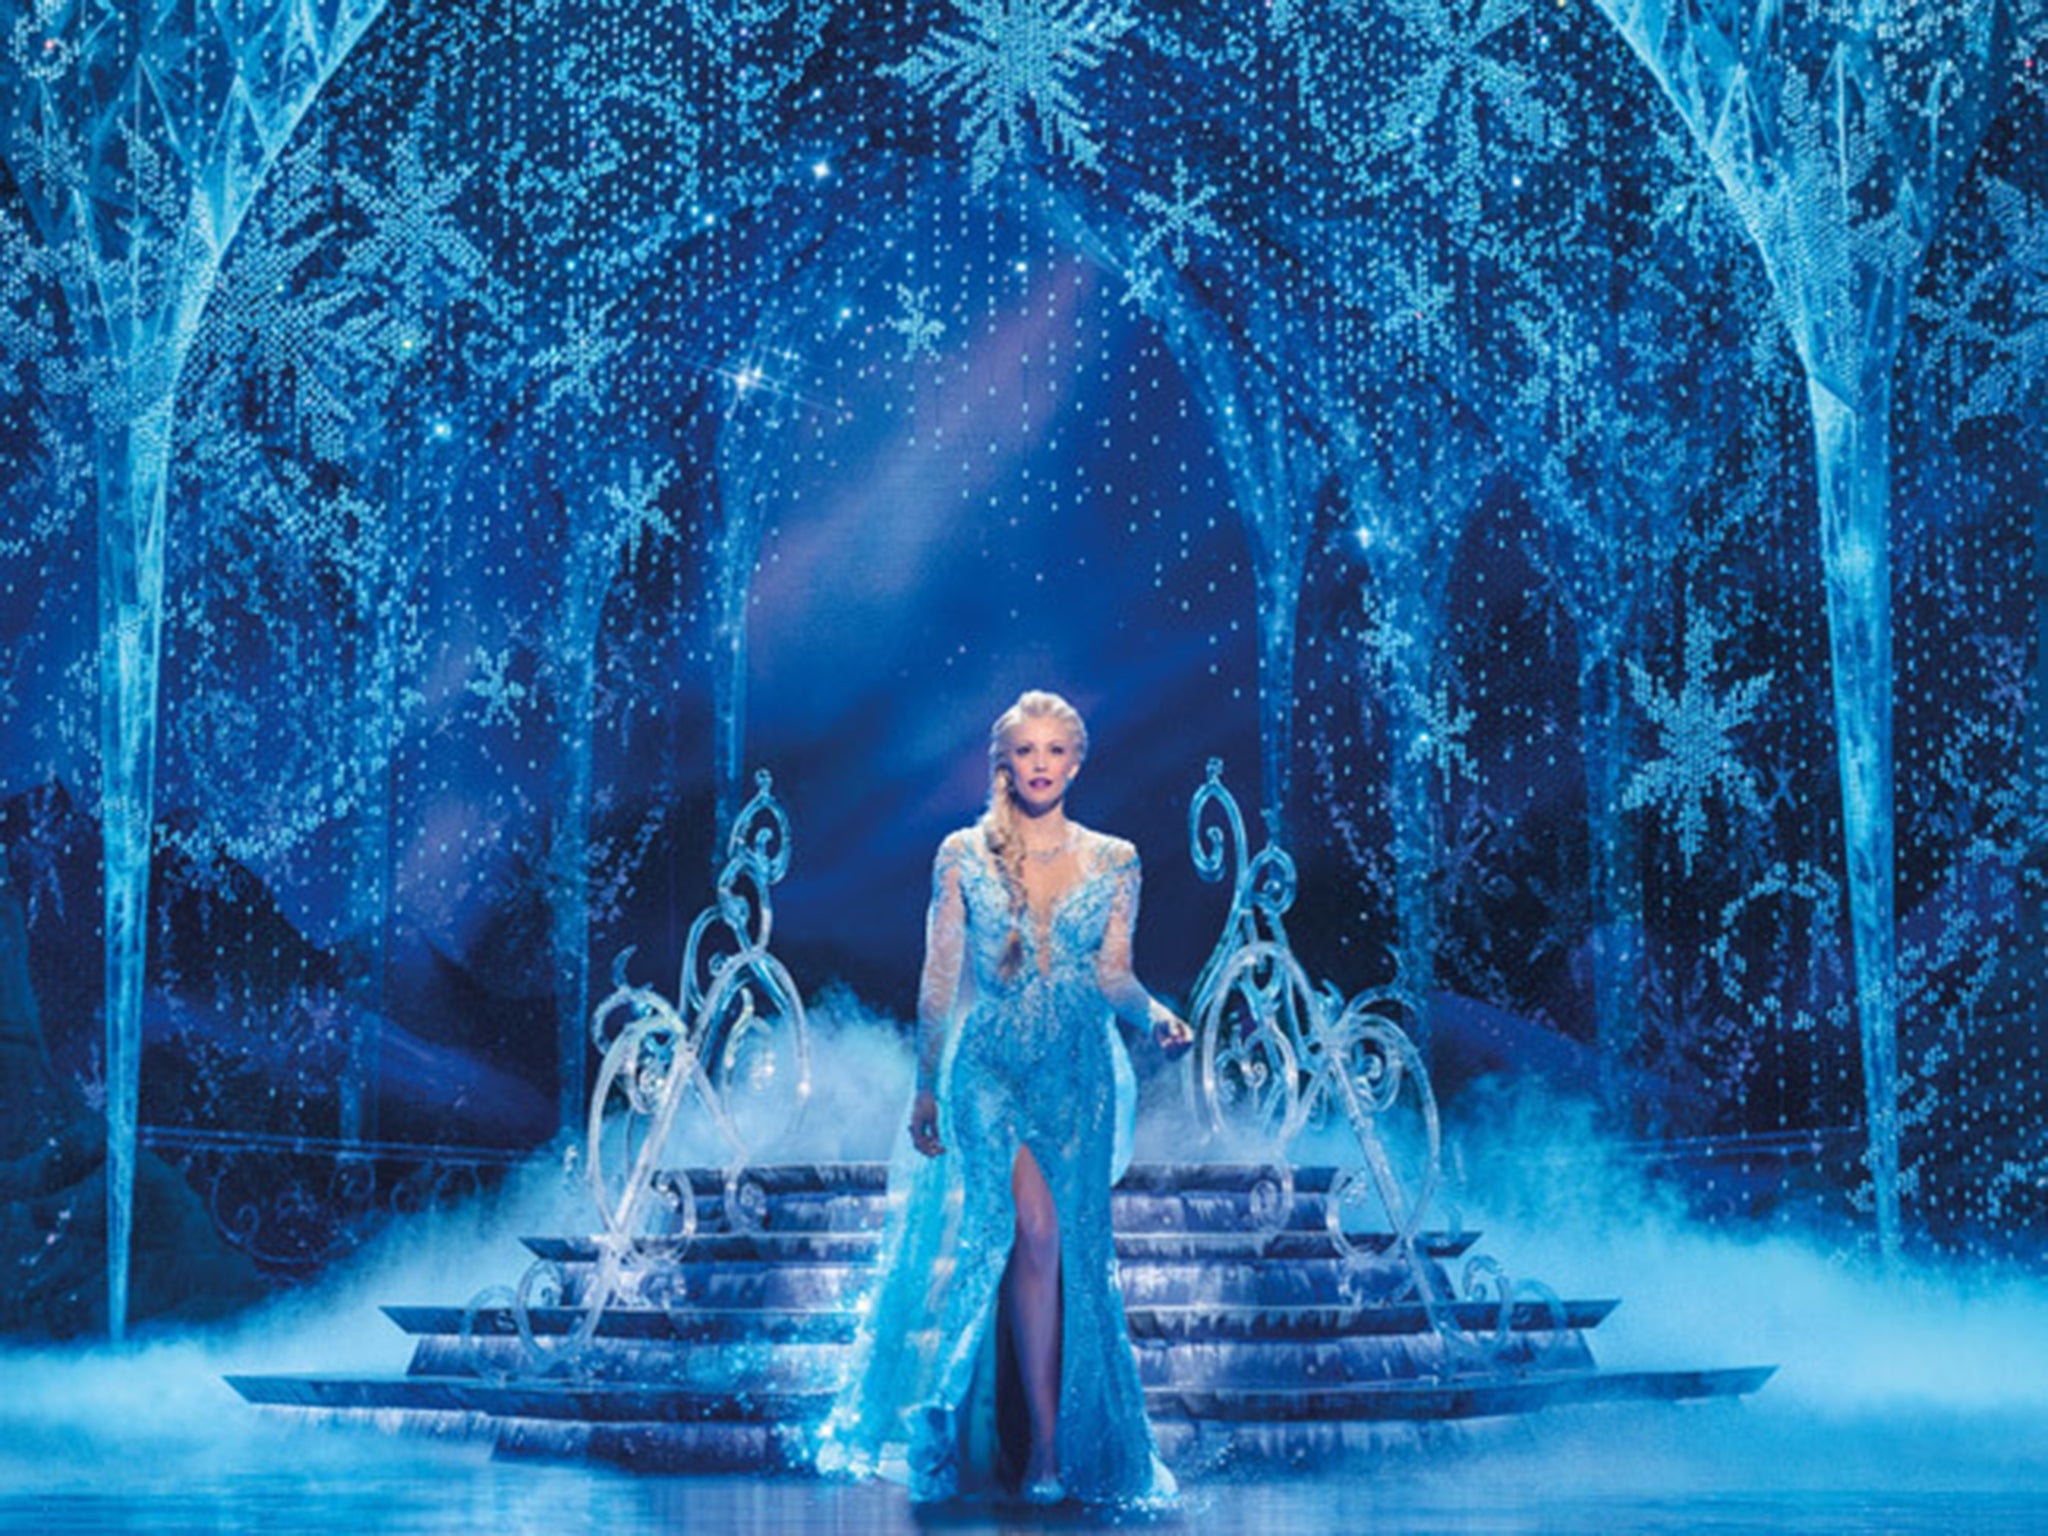 I needed proof of Covid status to take my daughter to ‘Frozen the Musical’